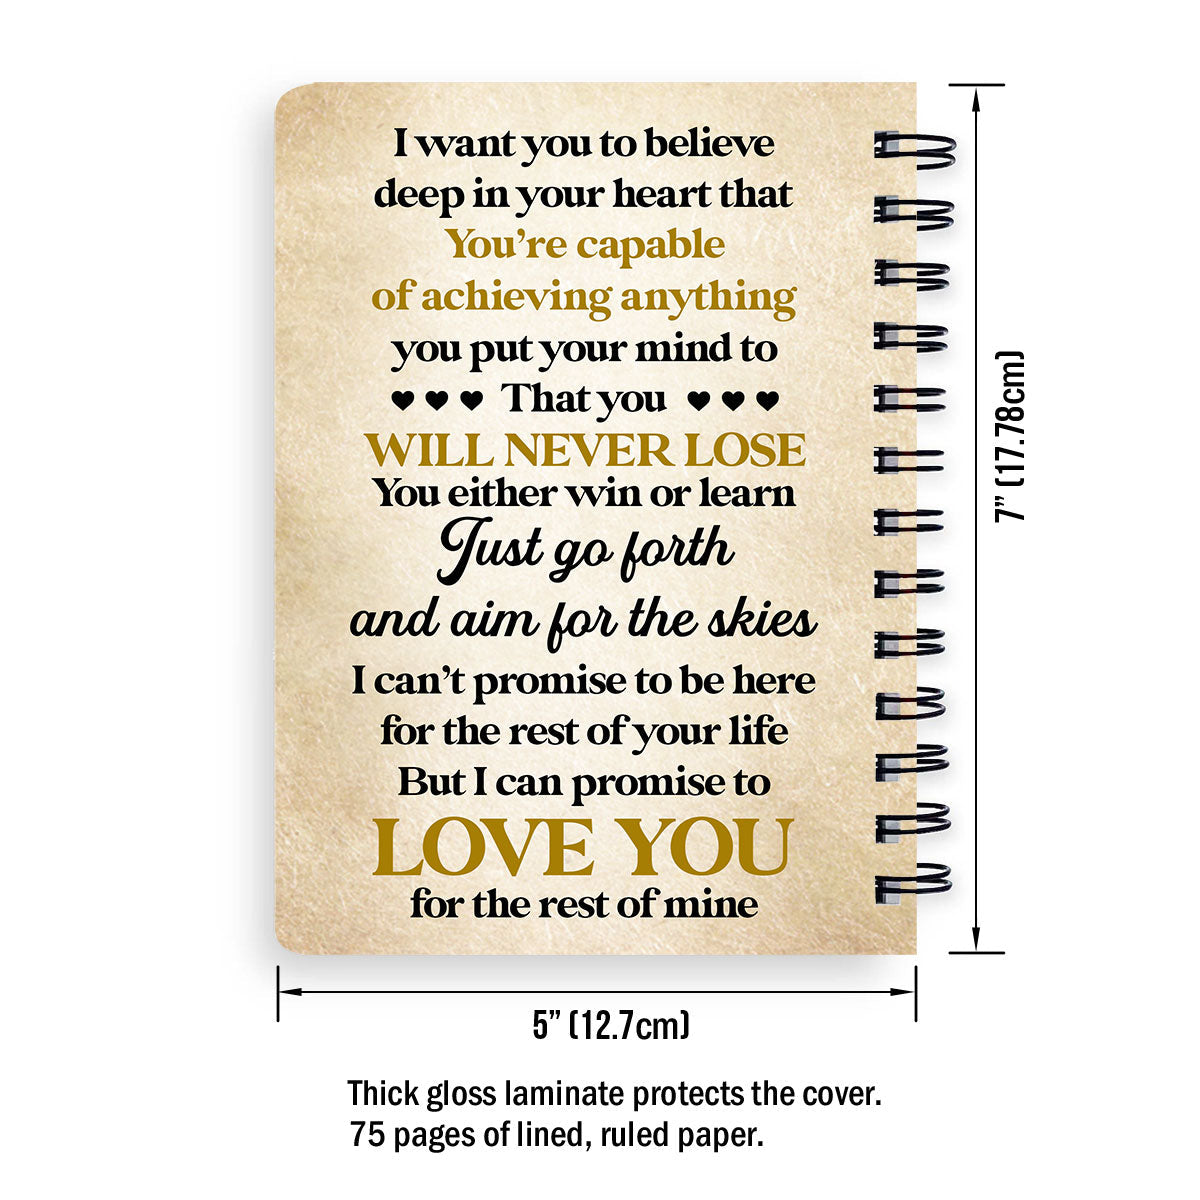 Personalized Spiral Journal For Children I Can Promise To Love You For The Rest Of Mine, Religious Gifts For Christian